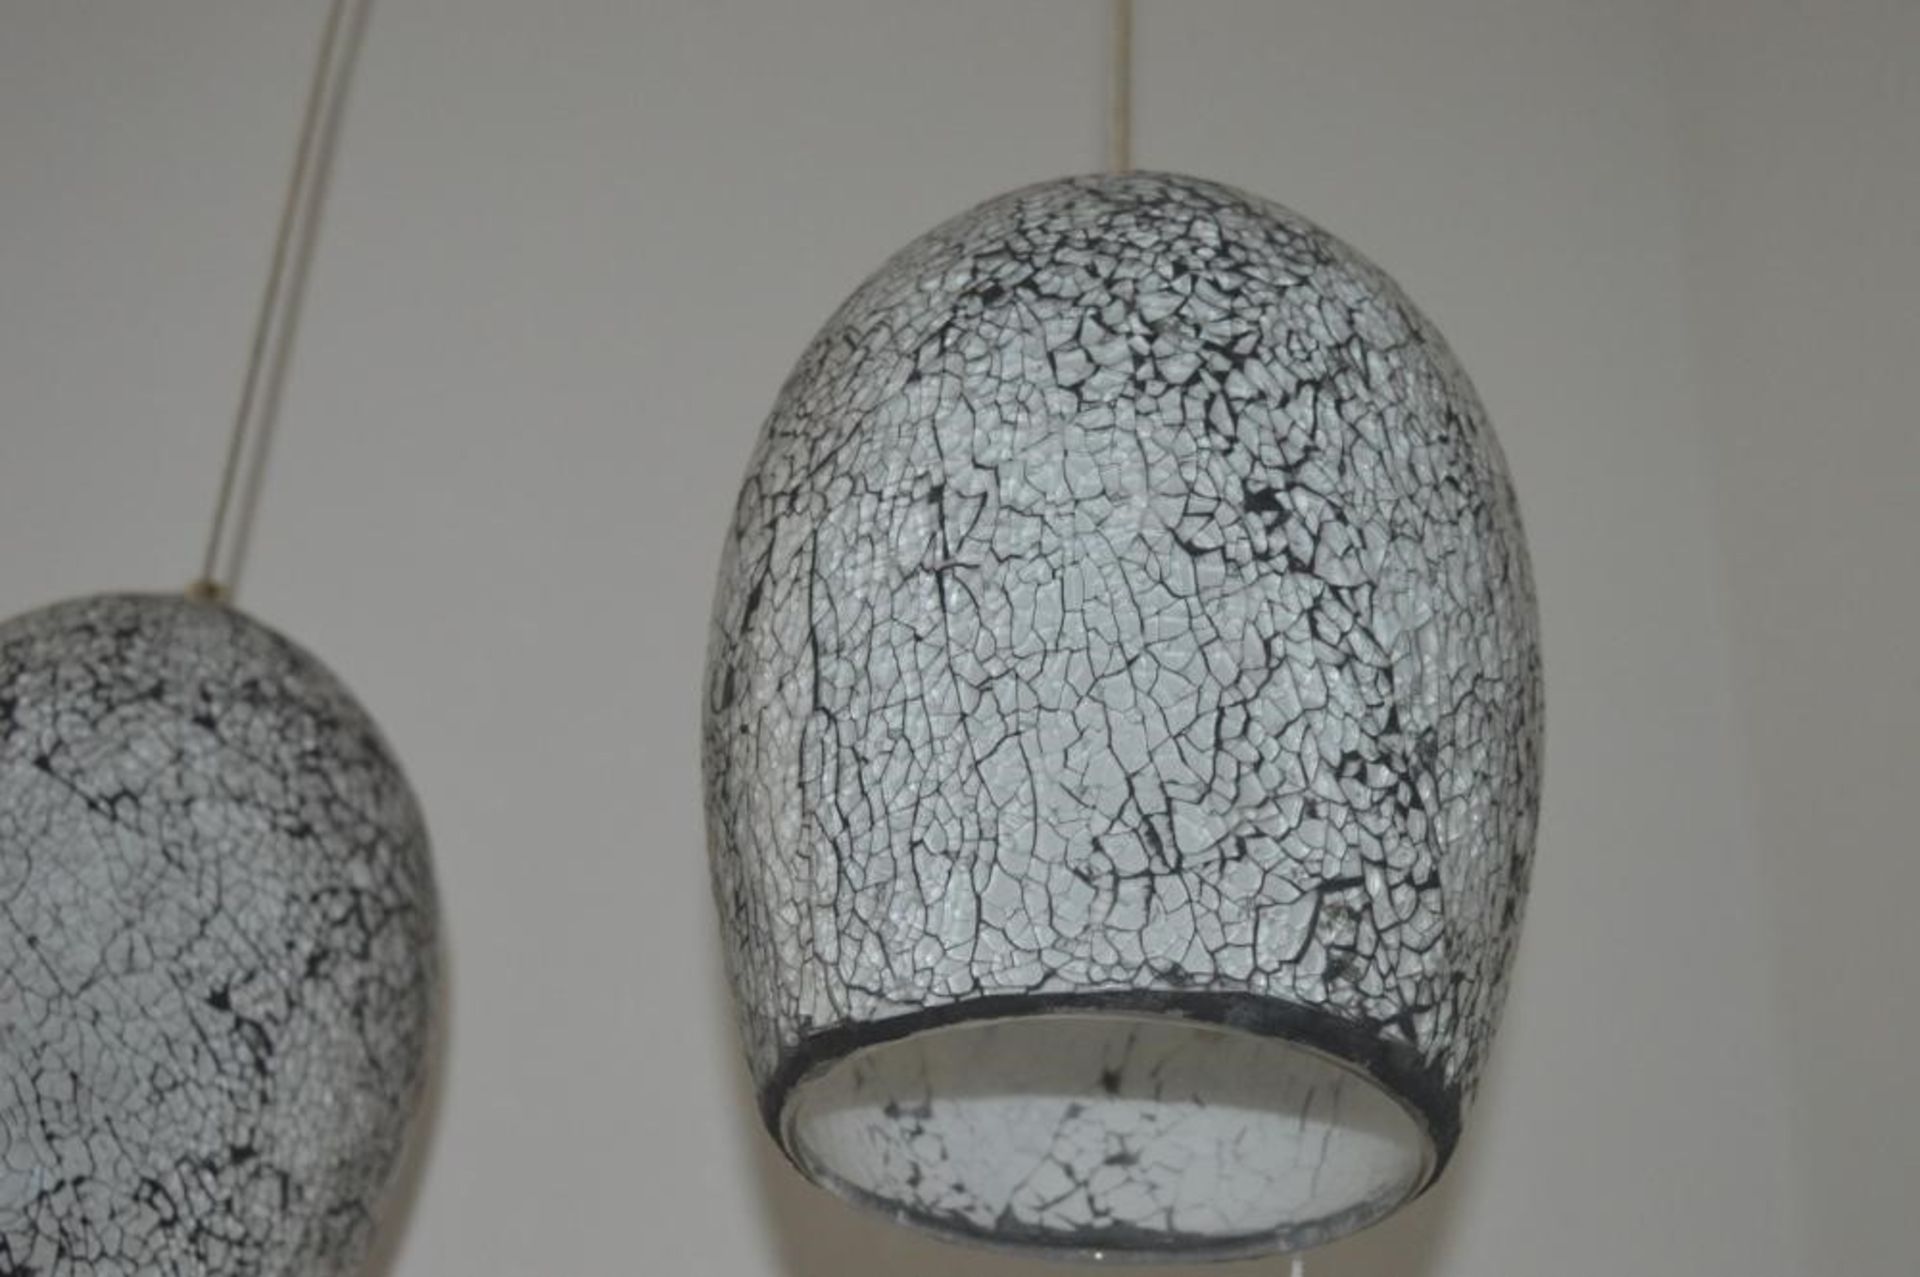 1 x Crackle White Mosaic Glass 3 Light Fitting With Dome Shades and Satin Silver Trim - Ex Display S - Image 2 of 5